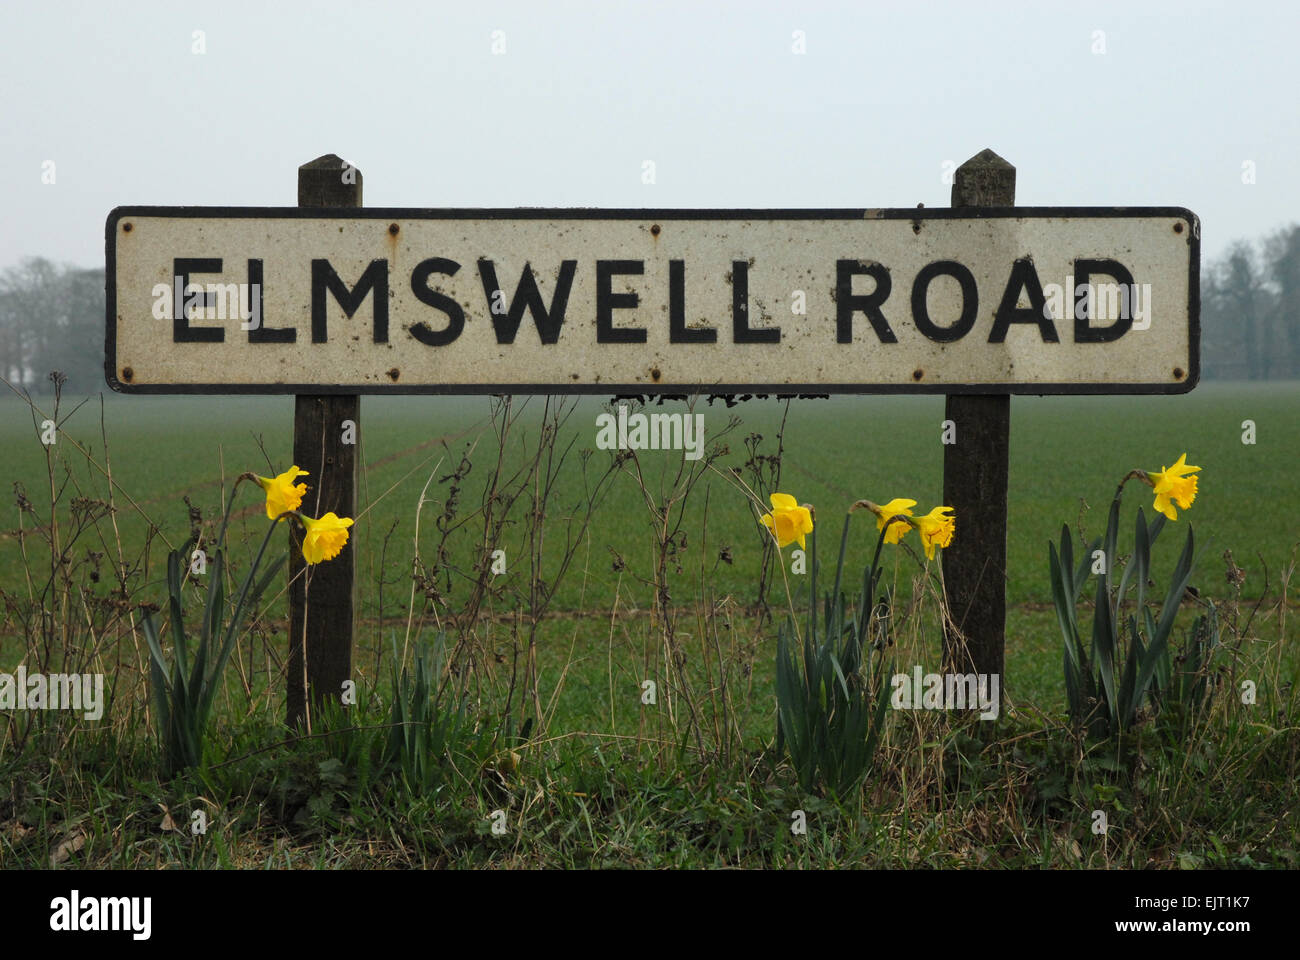 road name with daffodils Stock Photo